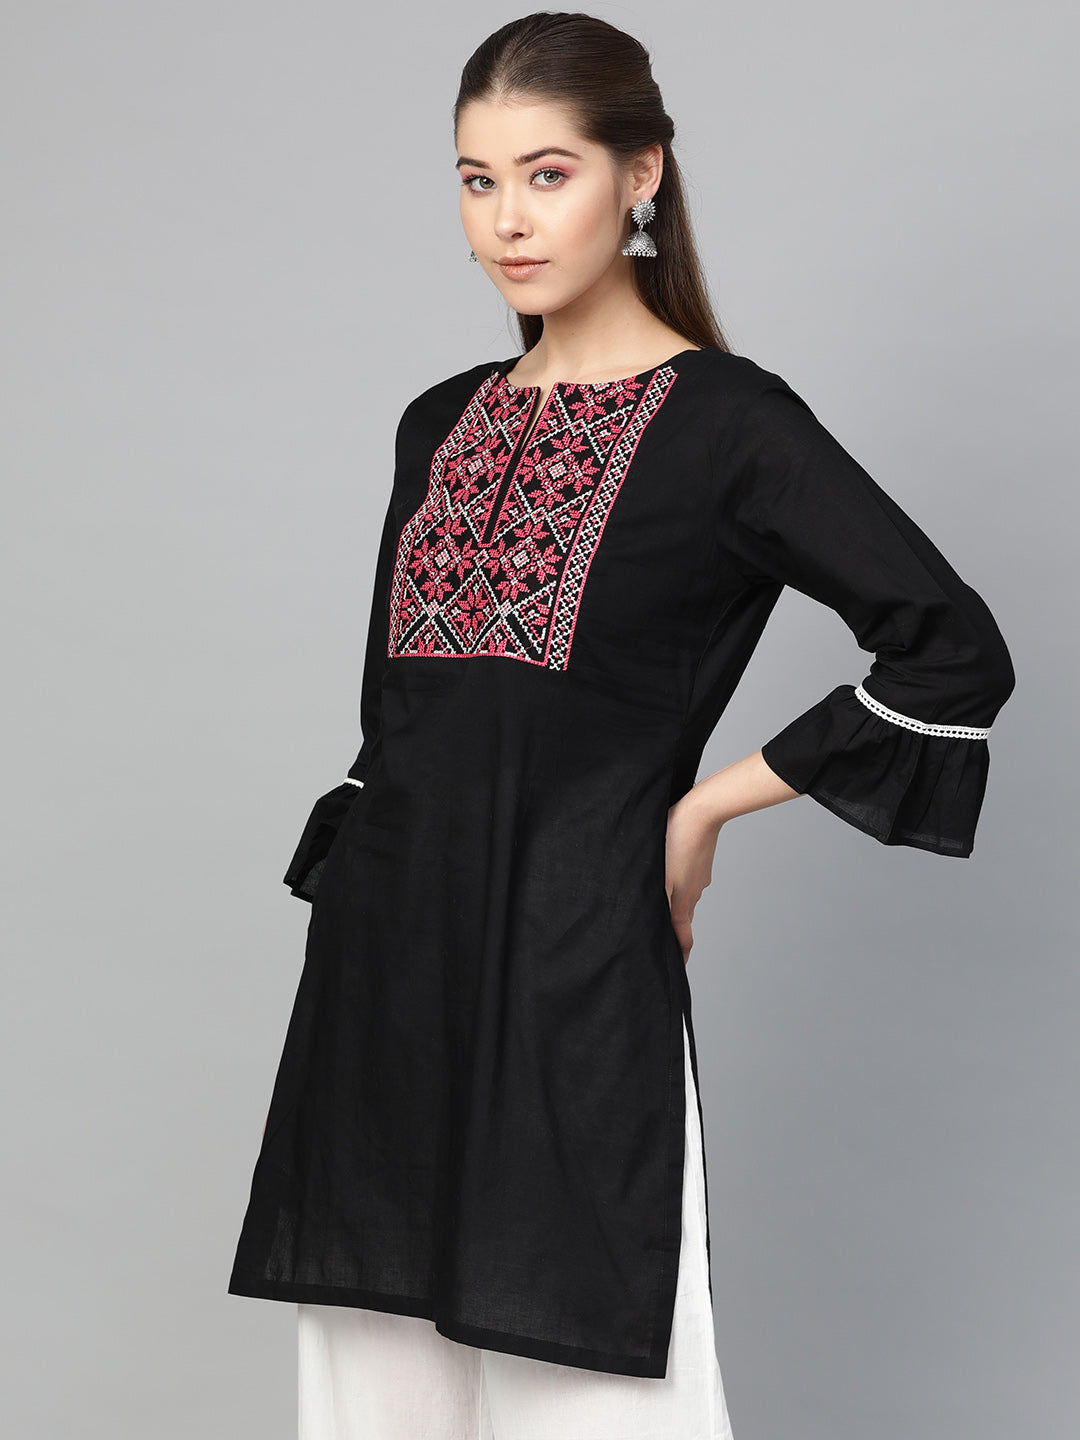 Bhama Couture Black Embroidered Tunic